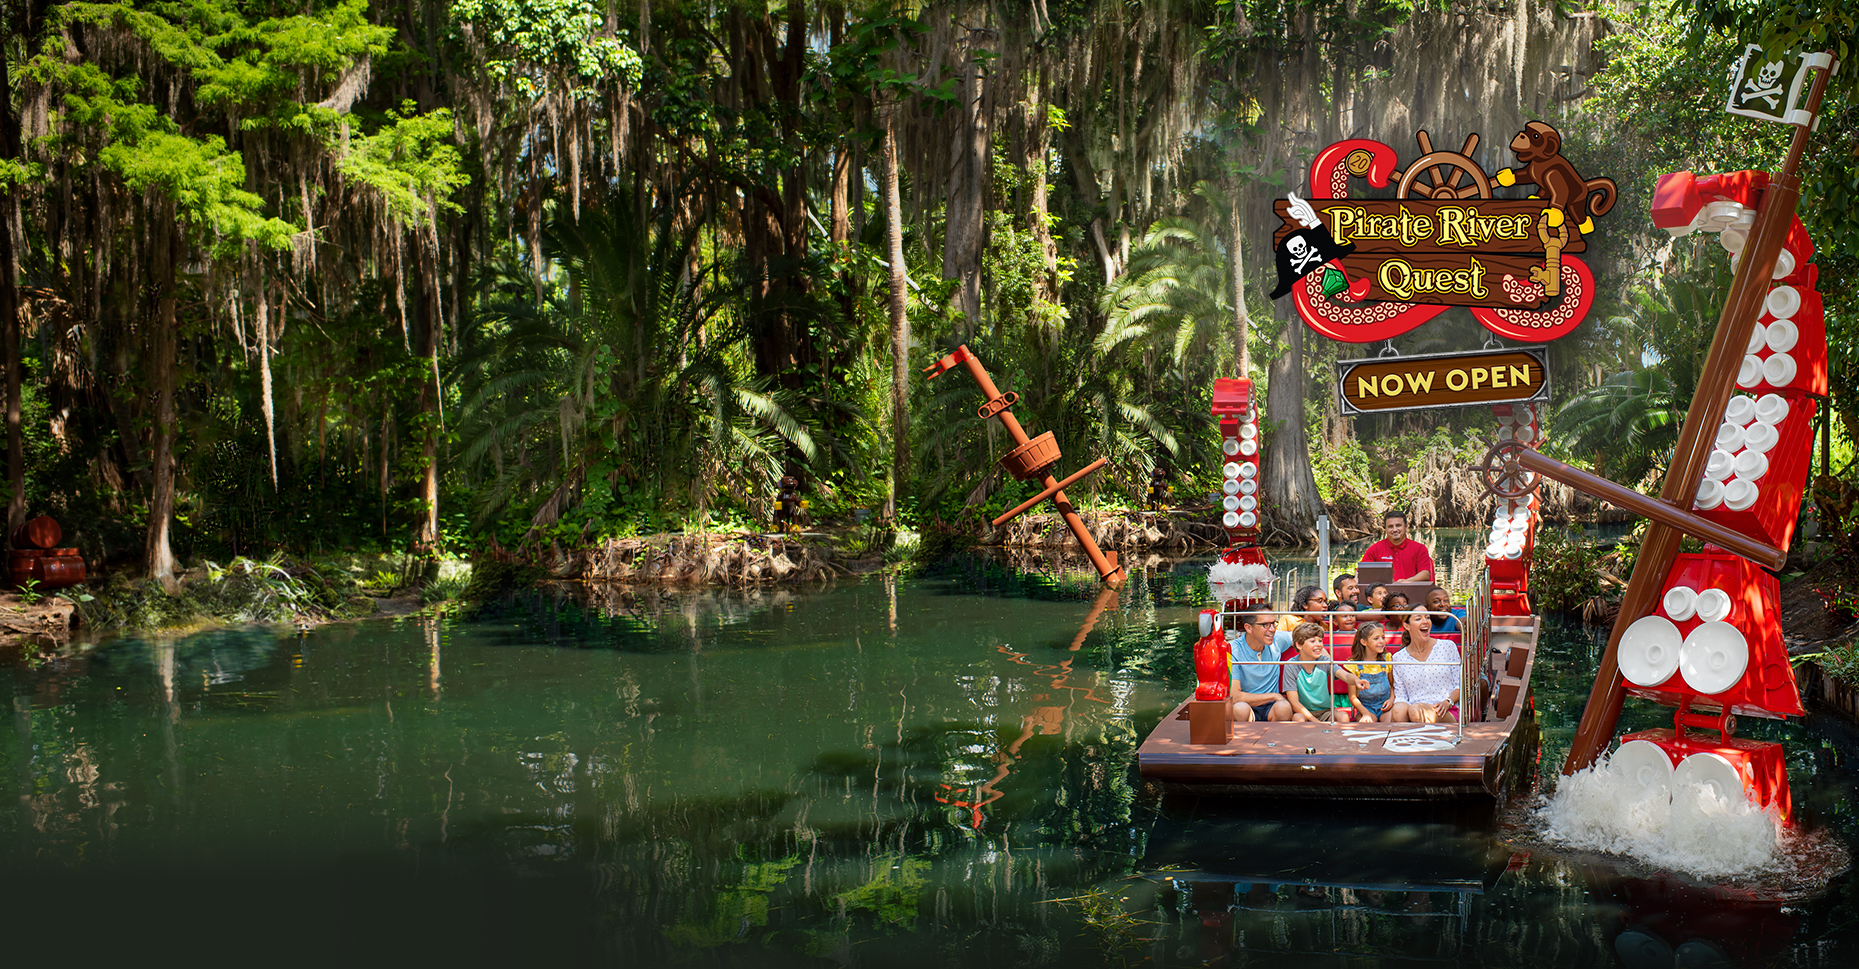 Pirate River Quest is Now Open